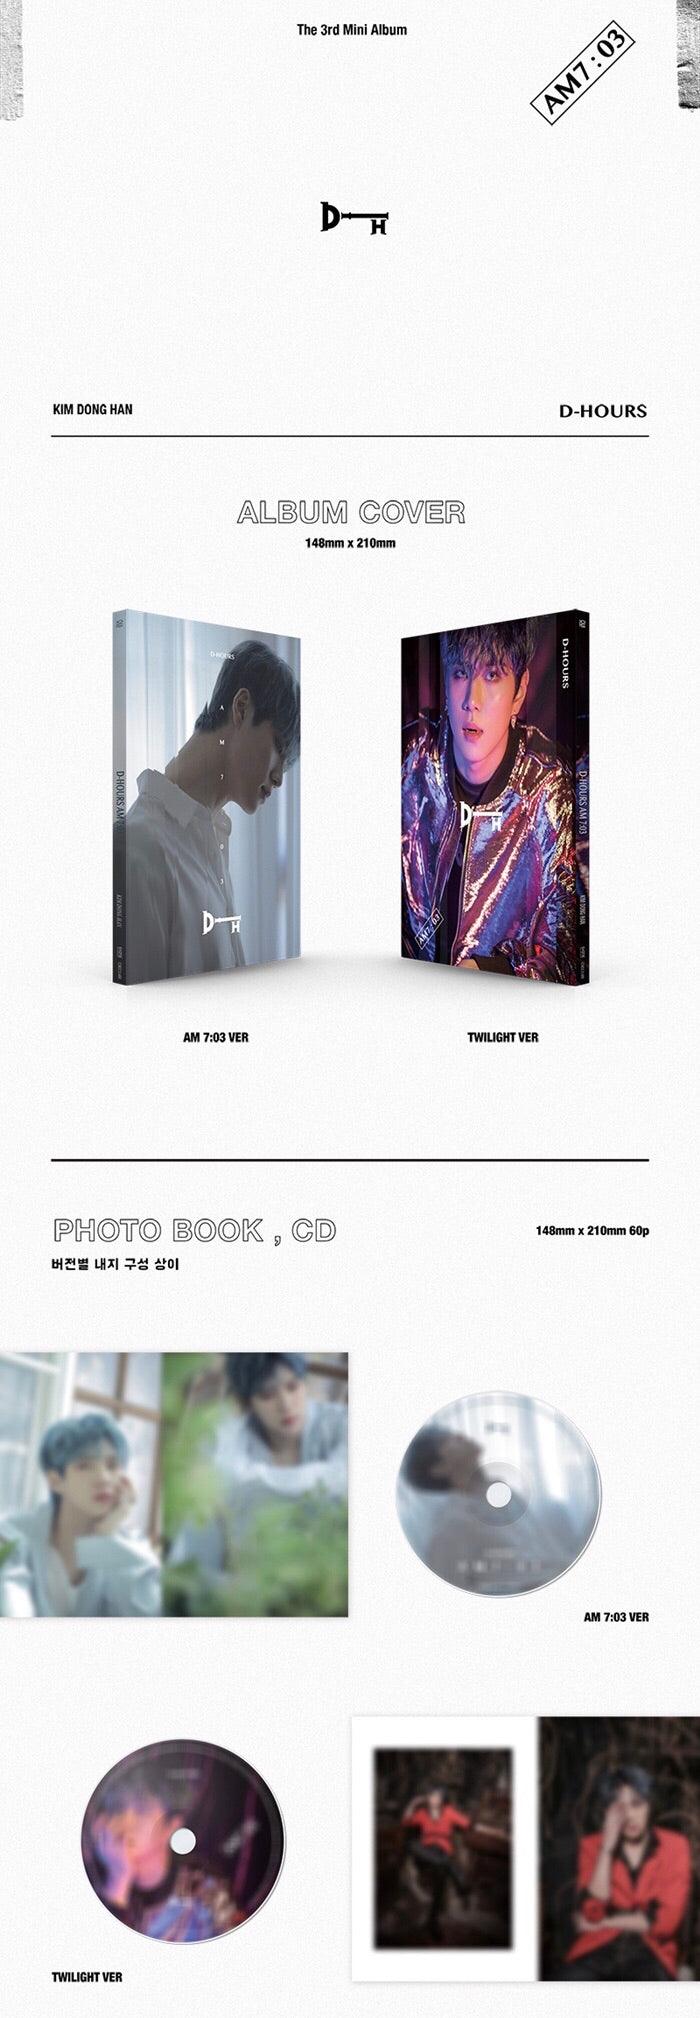 Kim DongHan - D-Hours Am 7:03 - J-Store Online